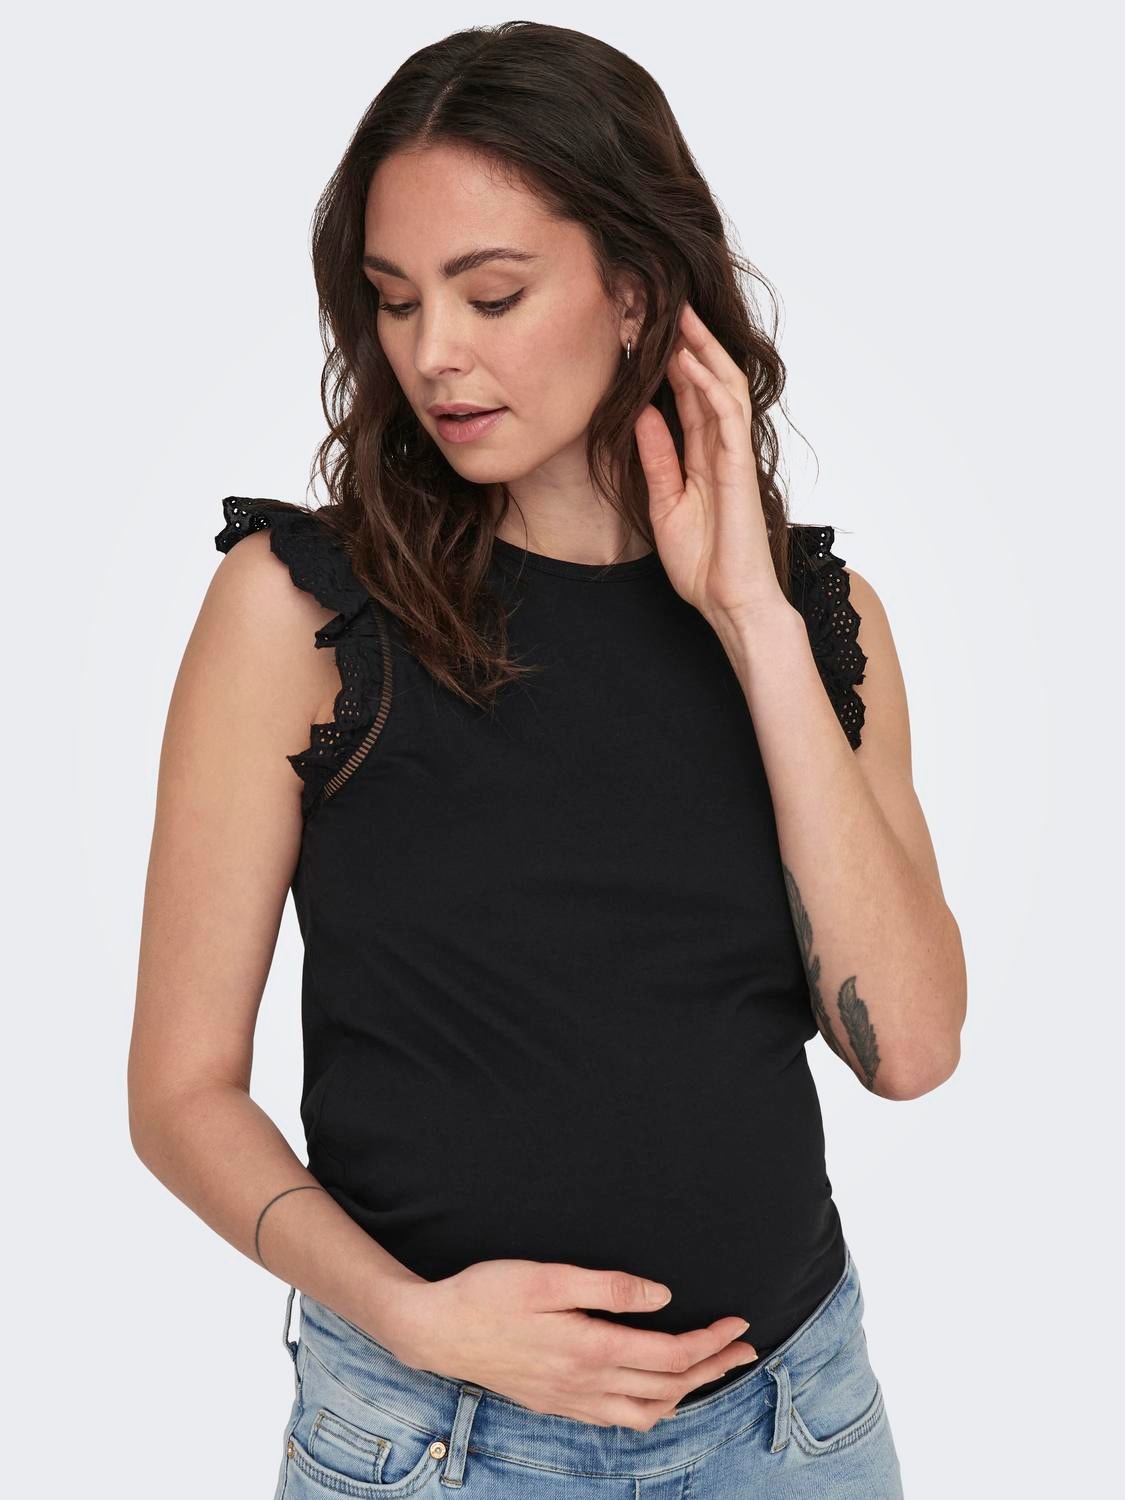 ONLY Regular Fit Round Neck Maternity Top -Black - 15304018